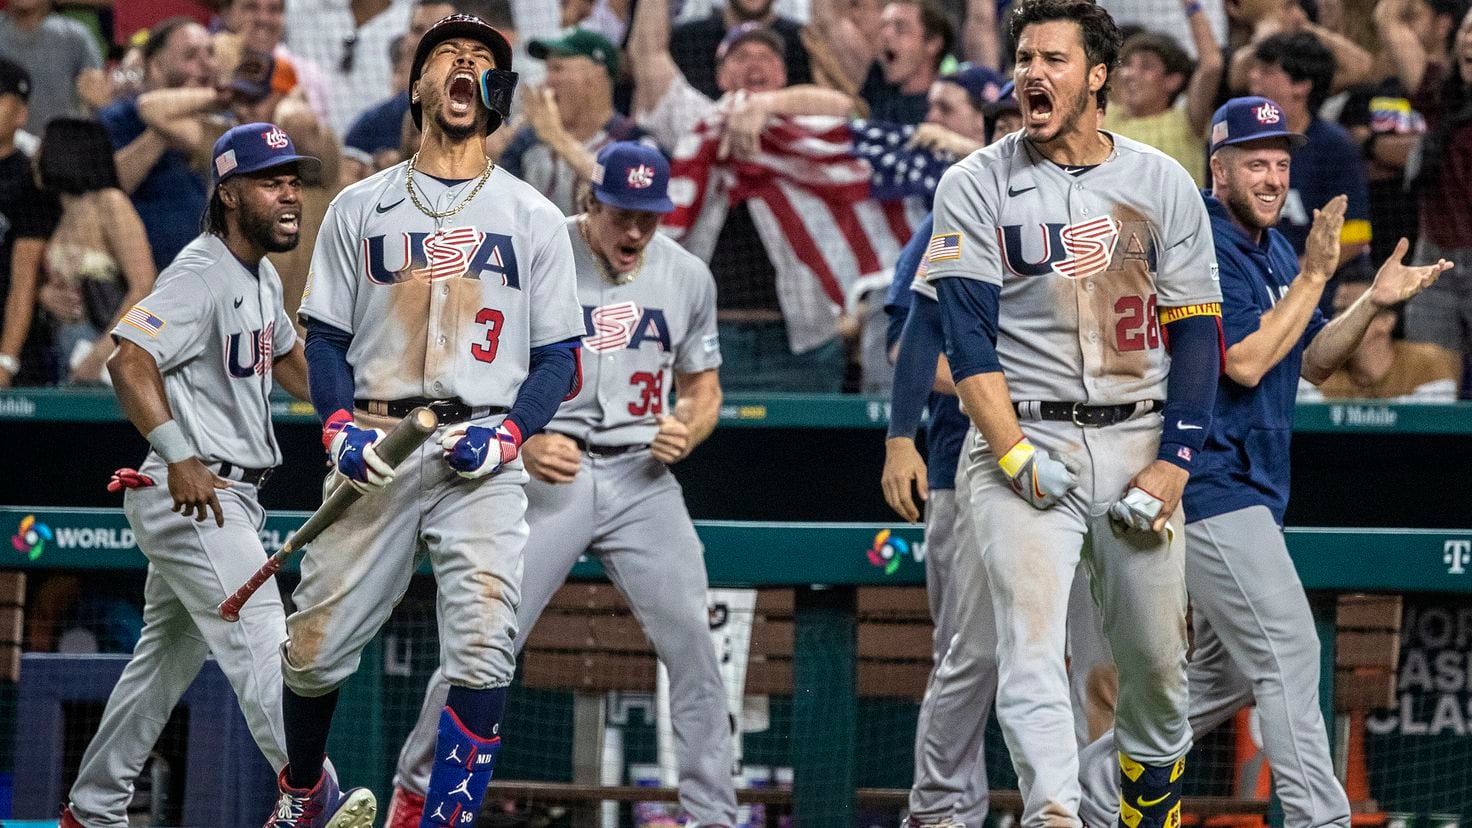 USA come from behind to advance to semi final in WBC USA vs Venezuela